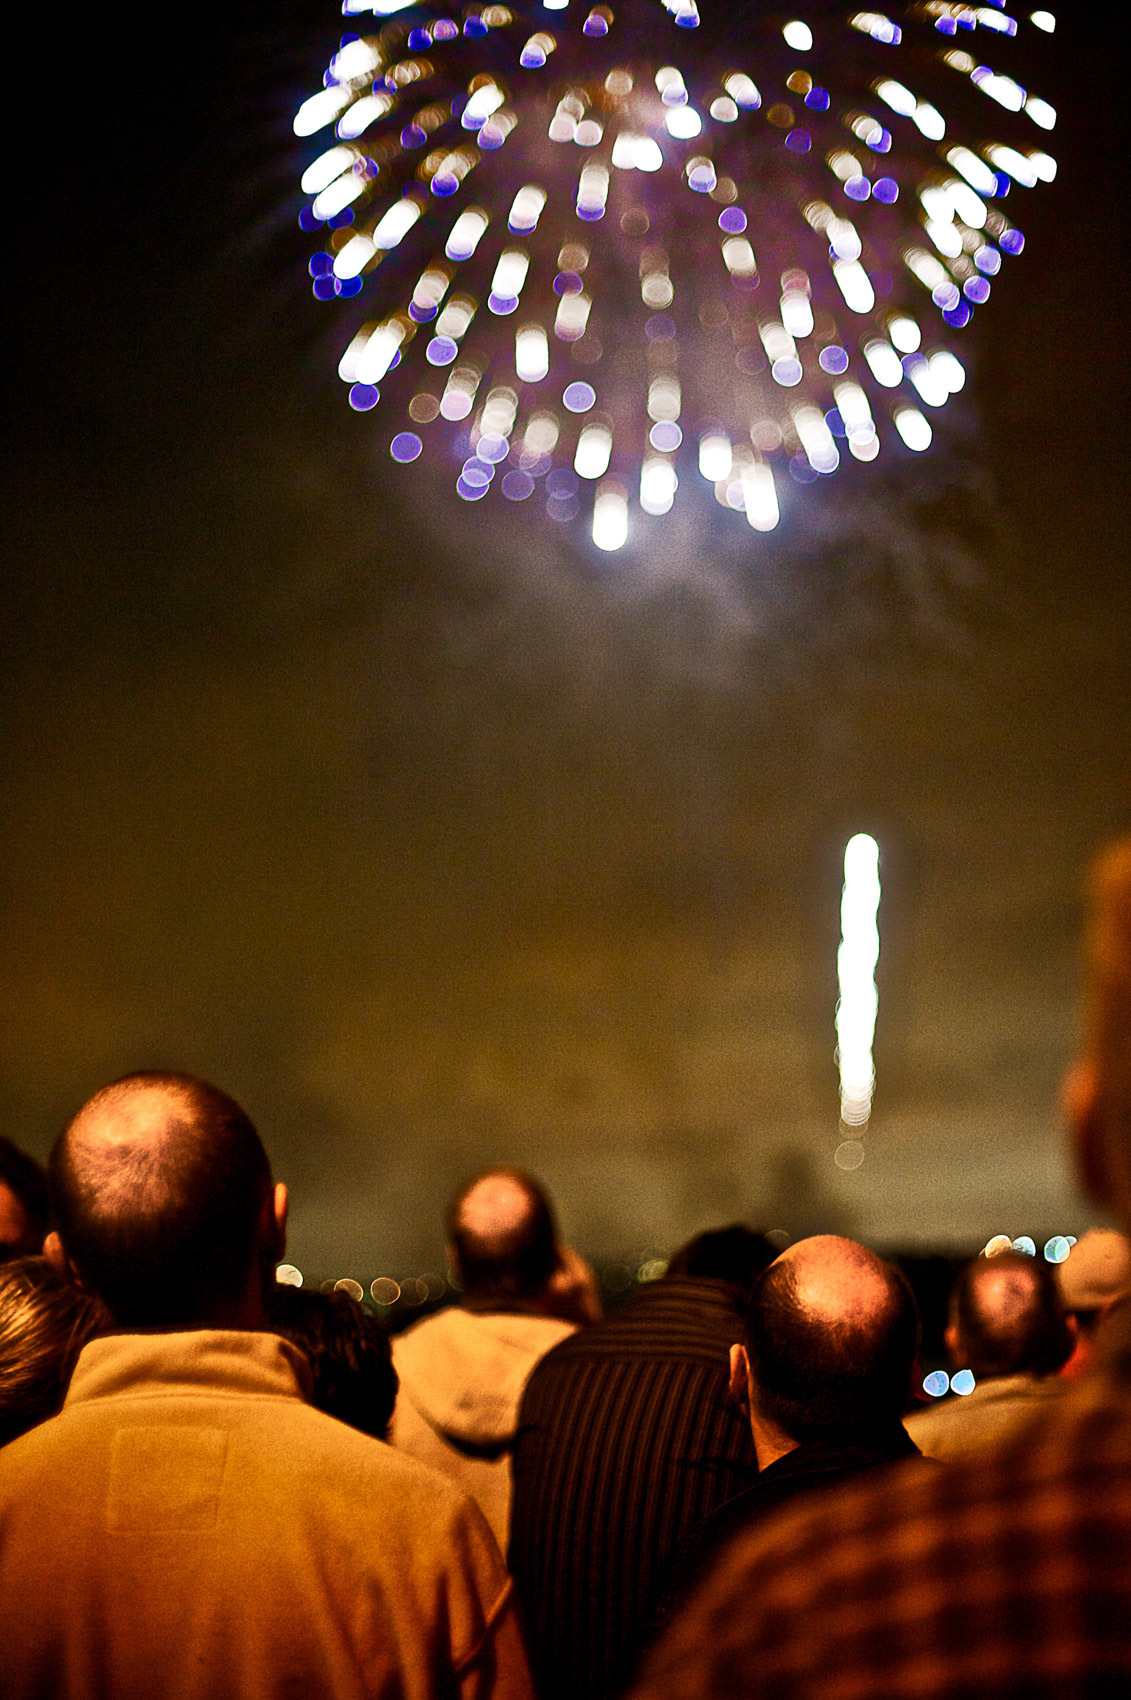 A group of bald heads watch fireworks in Marina del Rey, Calif. on the 4th of July.